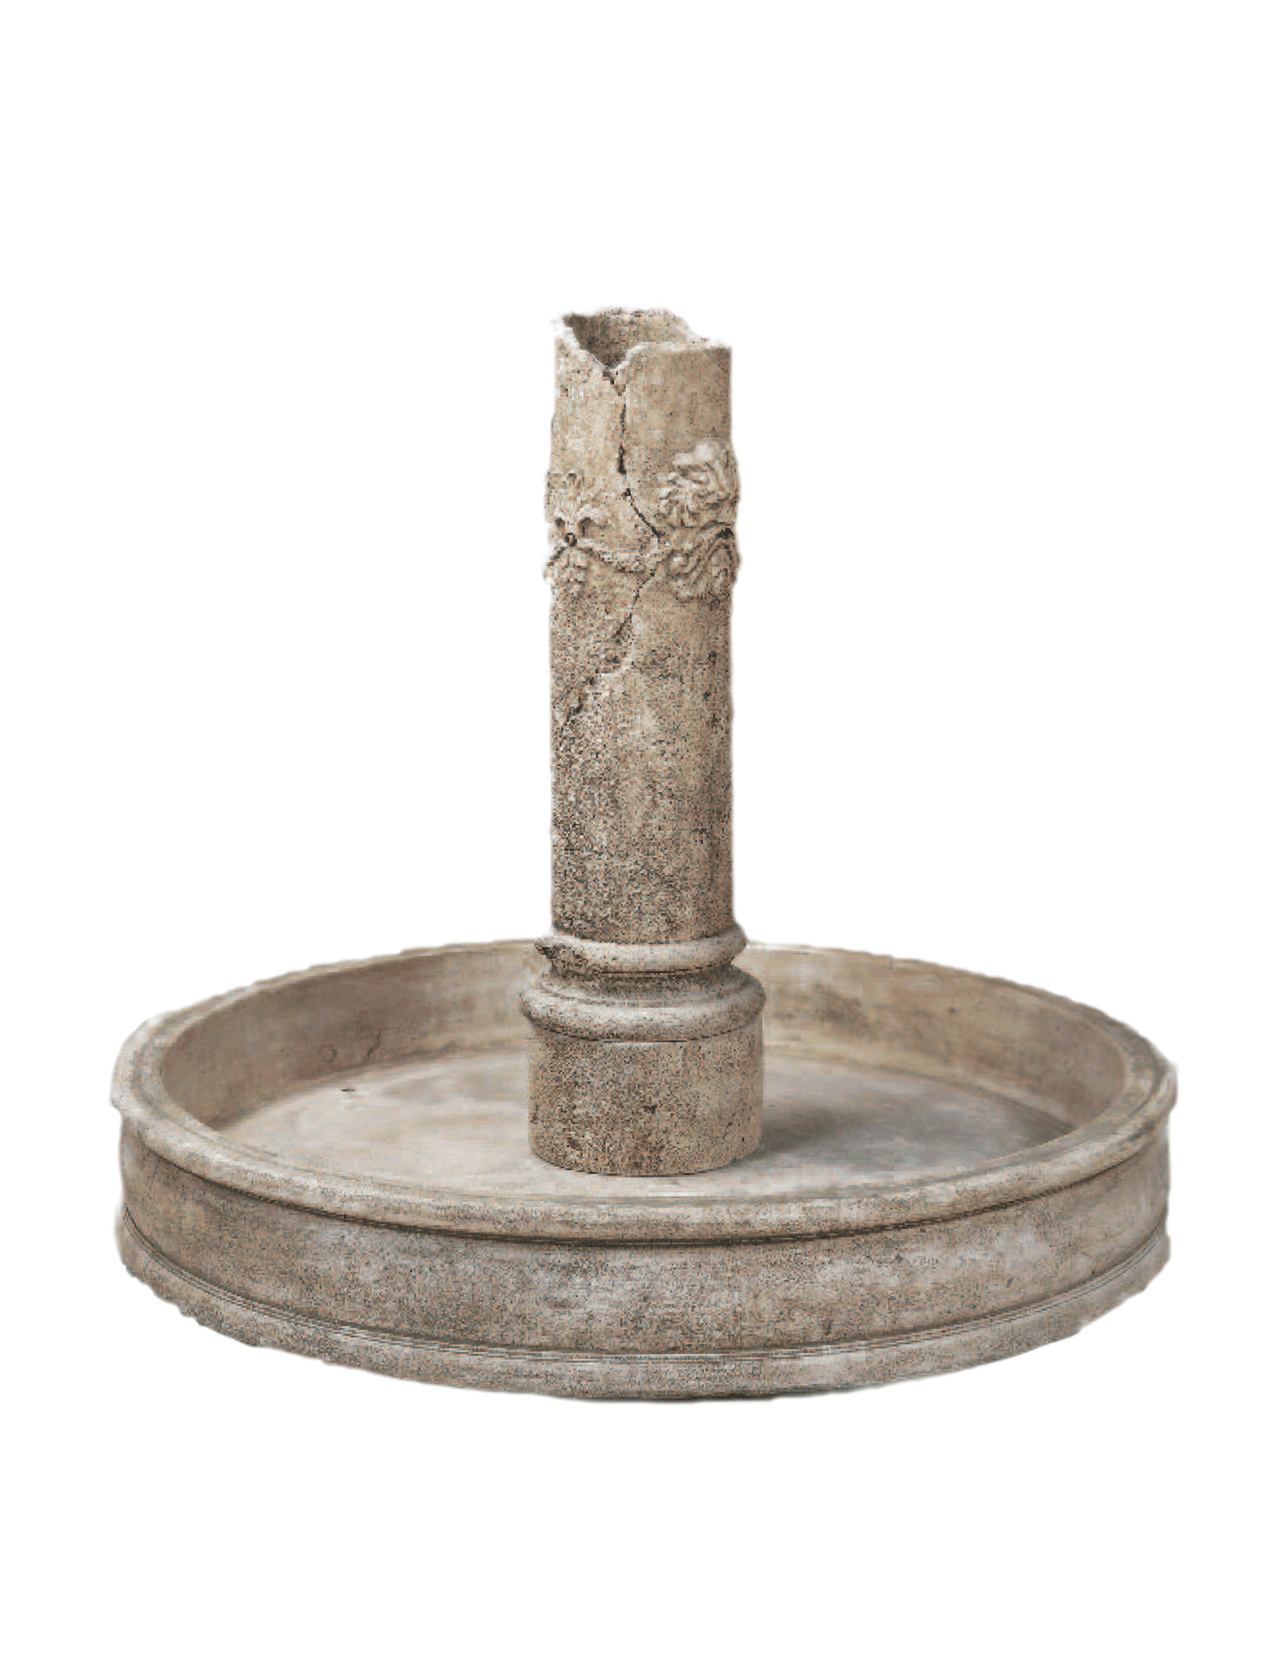 Green Man Pond Cast Stone Outdoor Garden Fountain With Spout Fountain Tuscan 